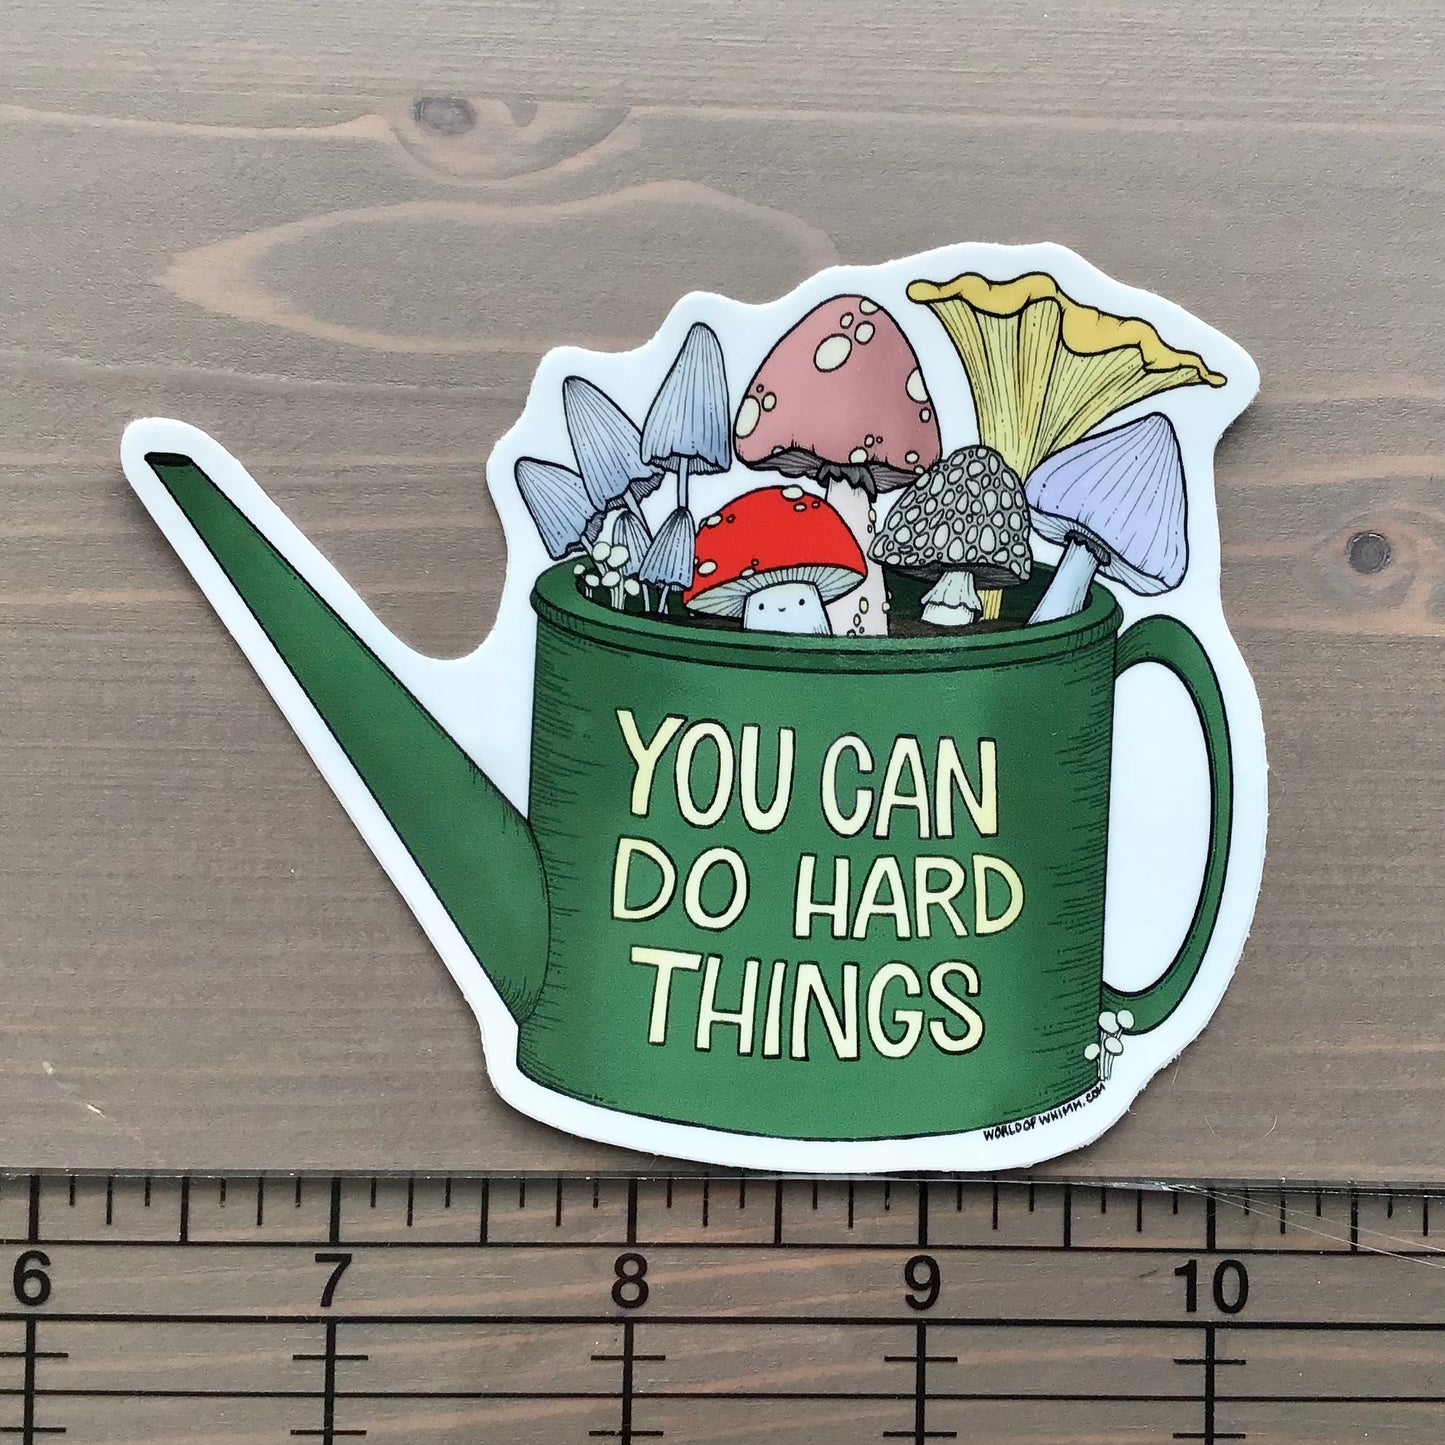 Vinyl Sticker - You Can Do Hard Things